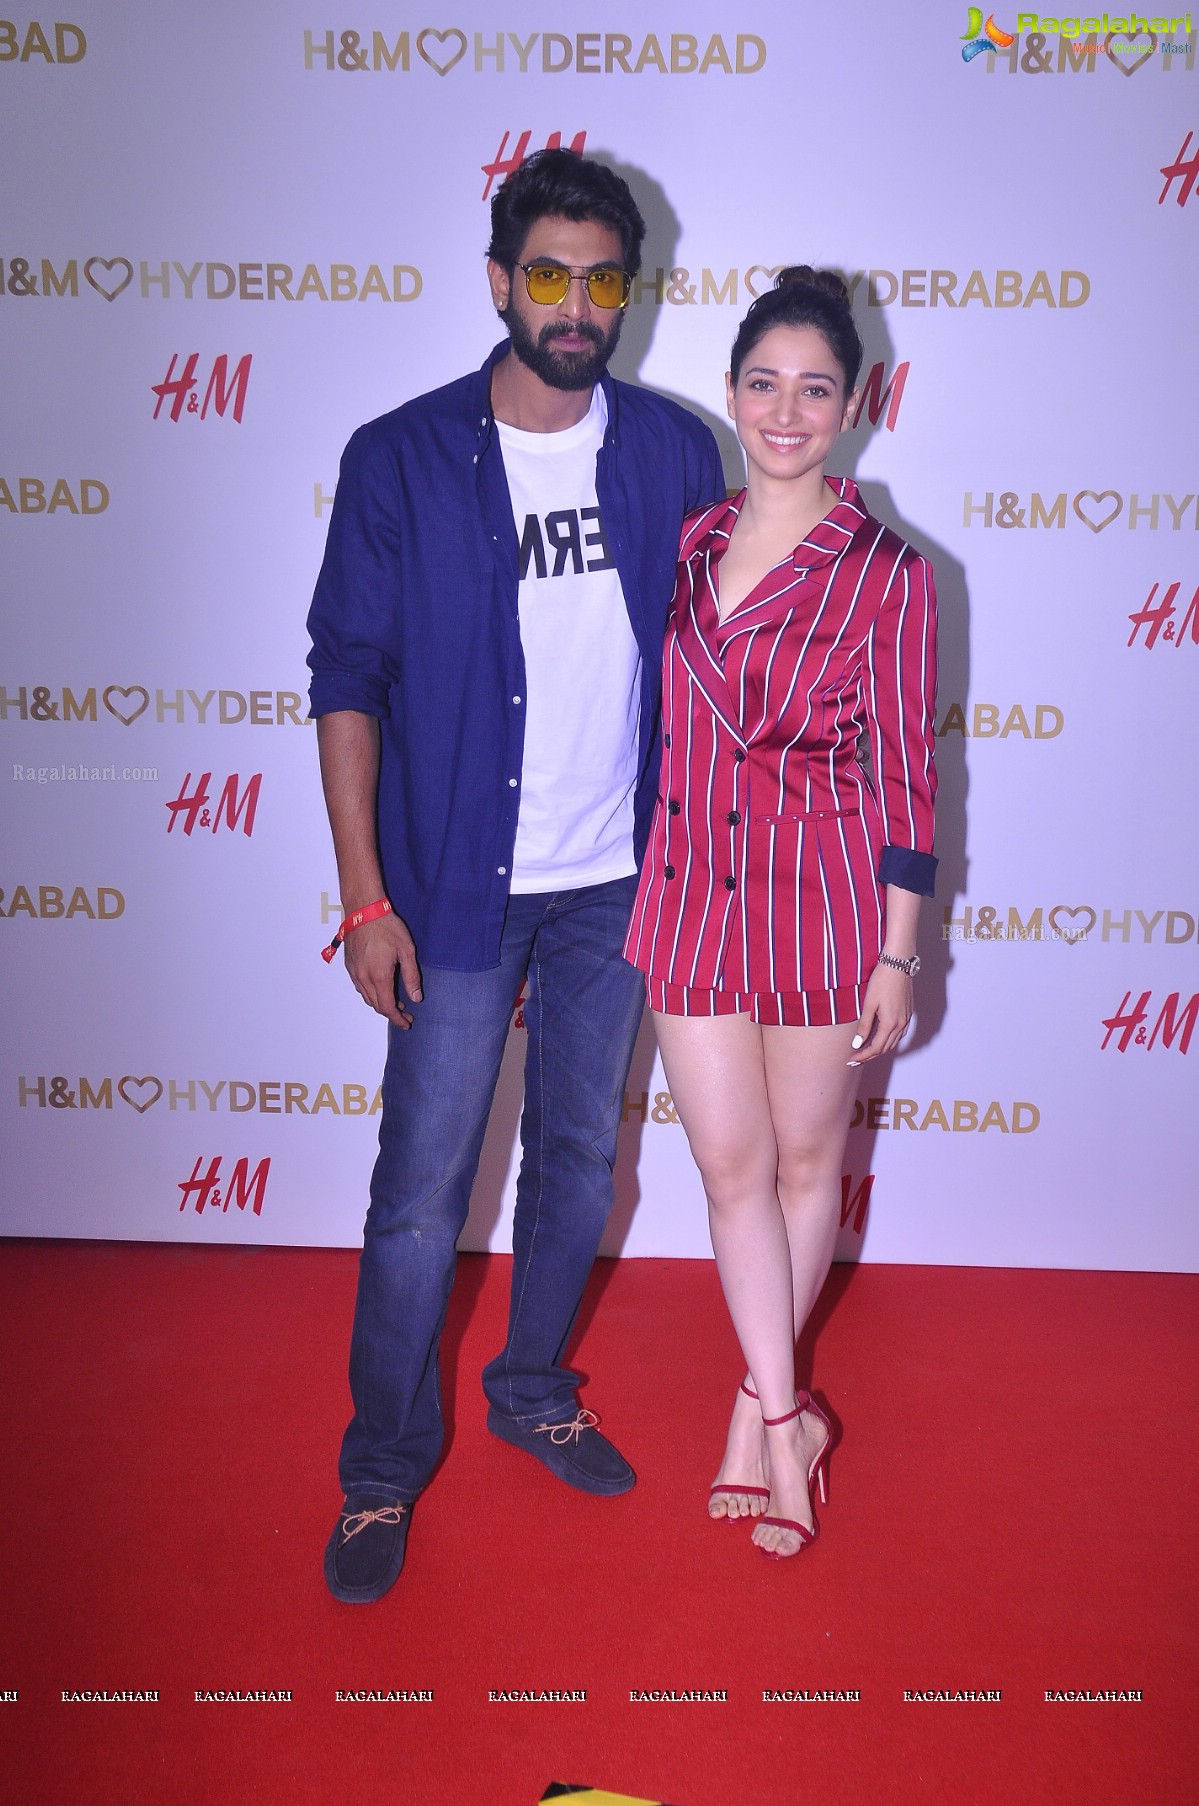 Celebrities at H and M Launch Party, Hyderabad